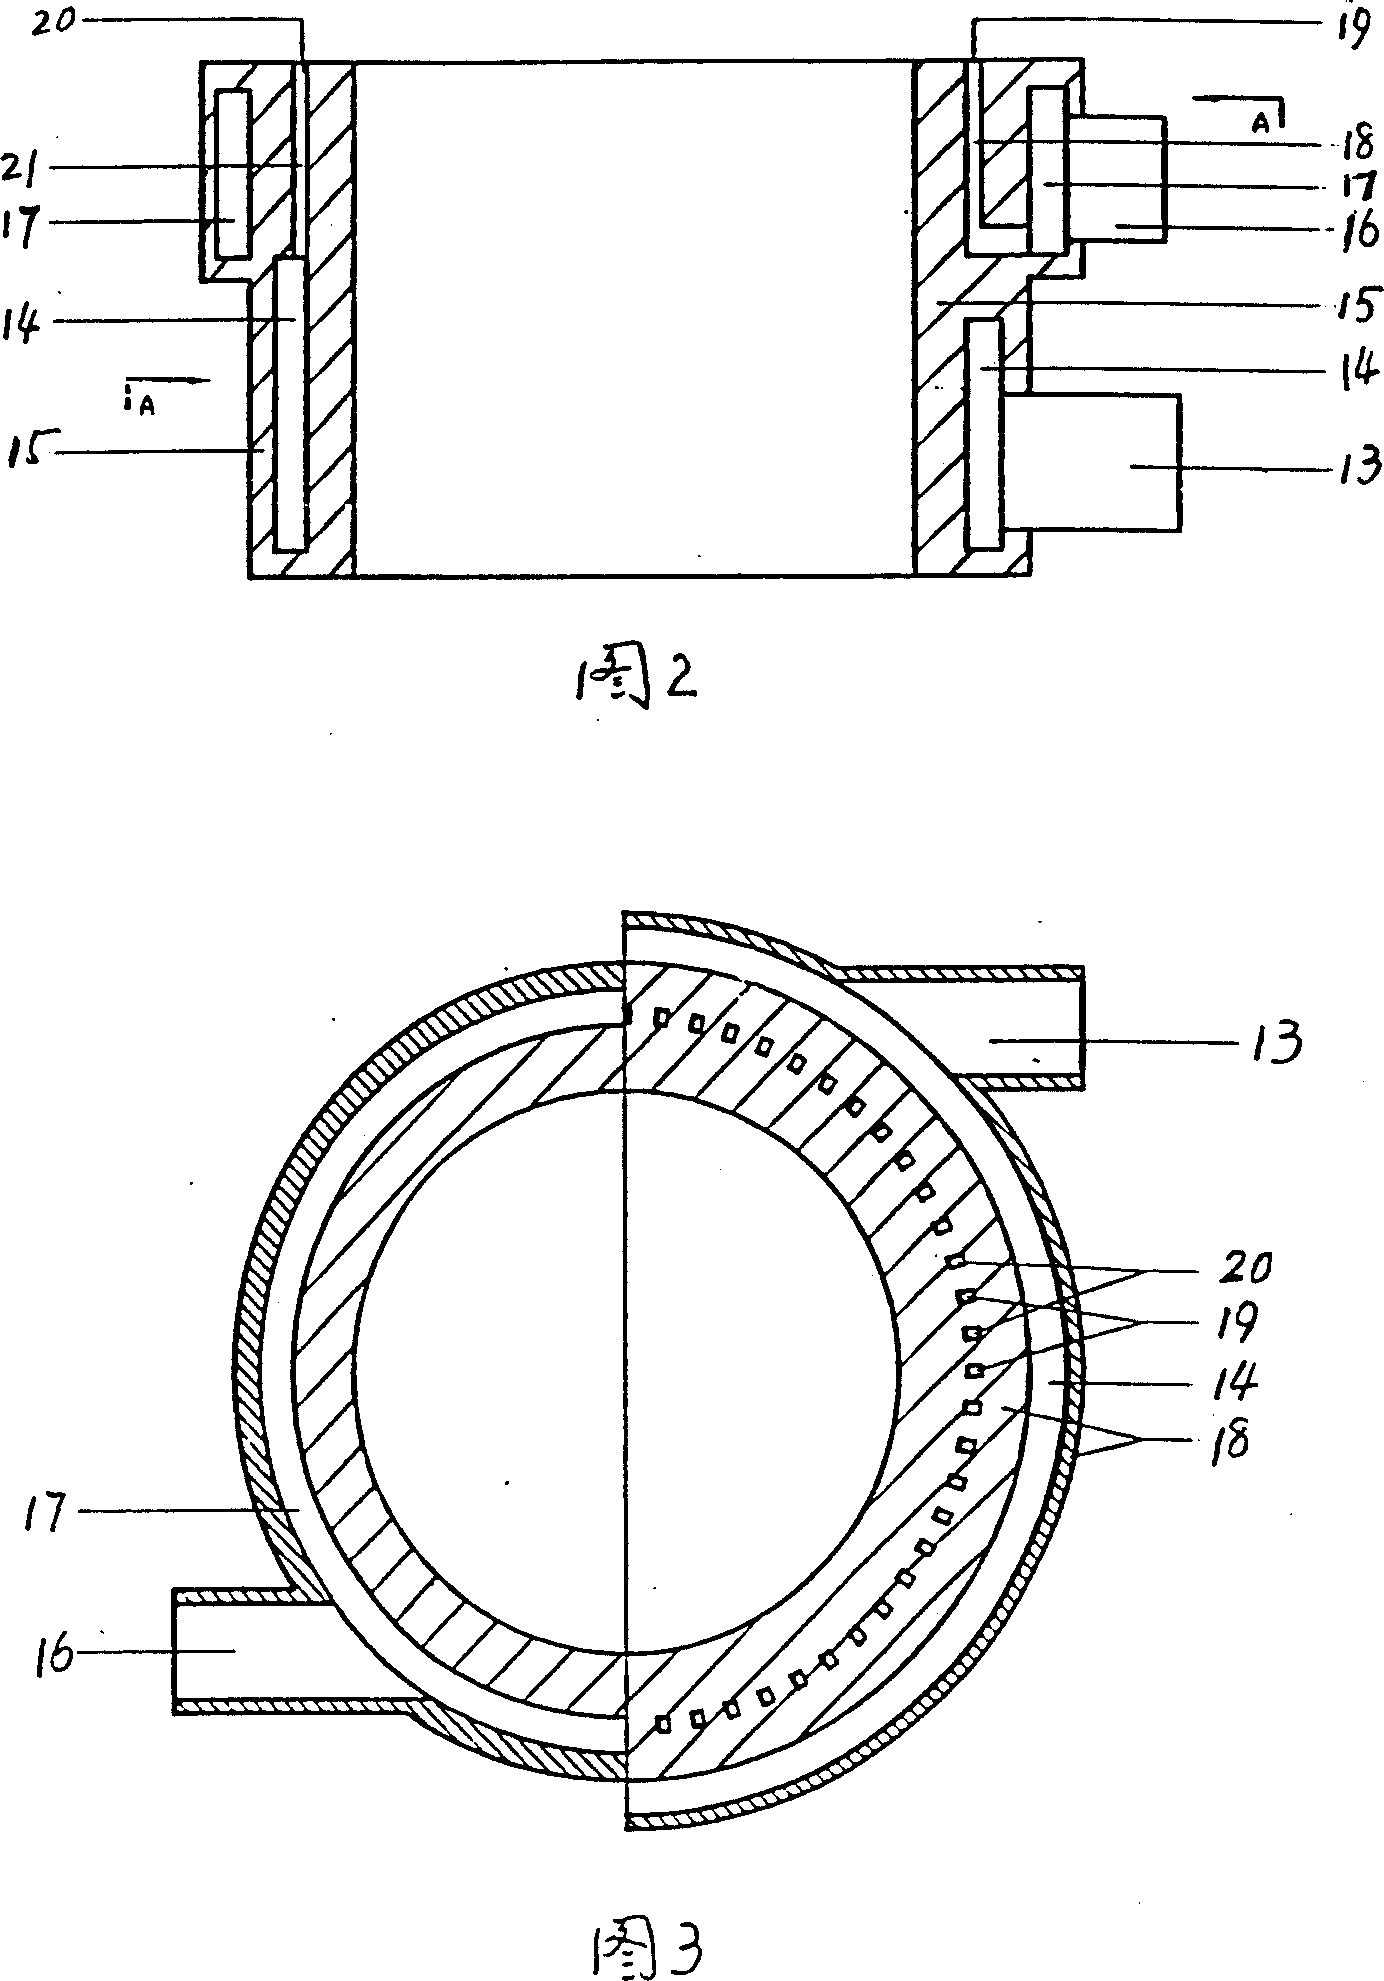 Ball-shape top-burning type hot-air furnace with annular-arranged vertical up-spray burner